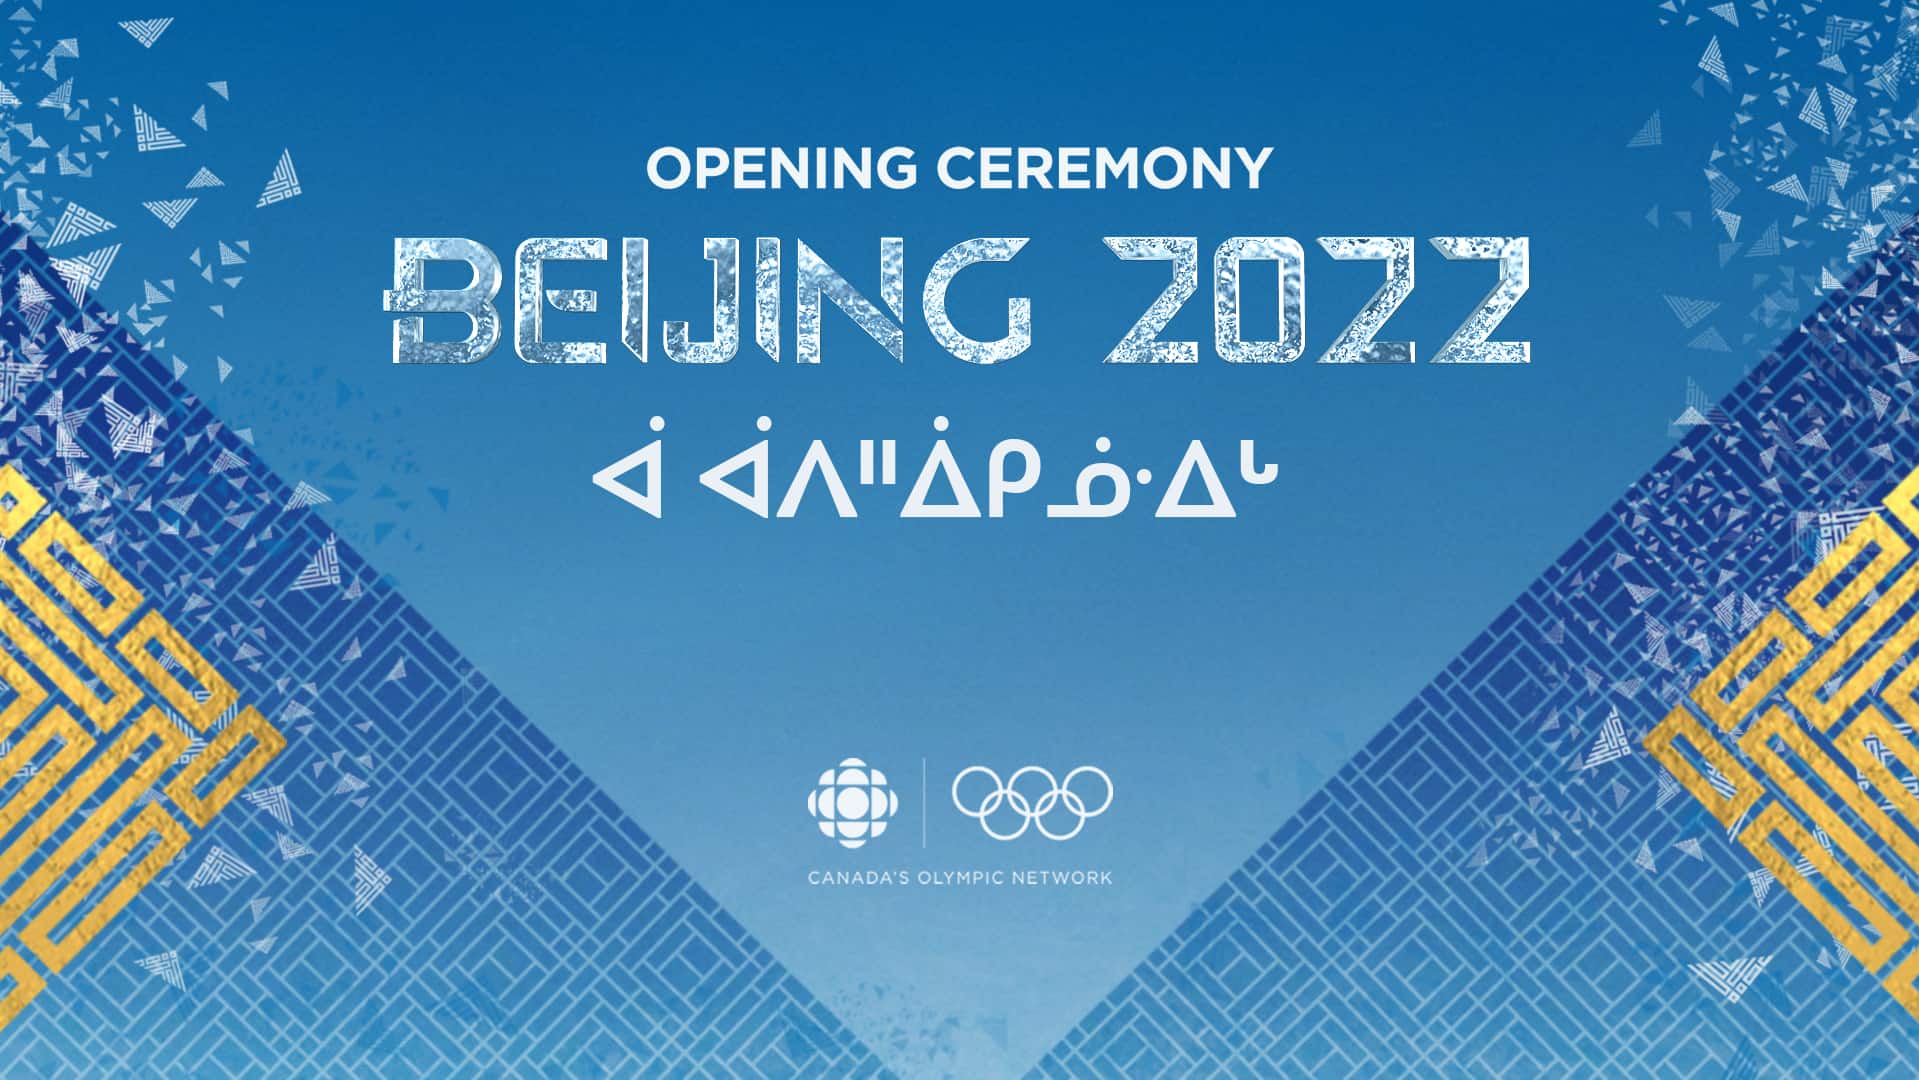 How to watch the Beijing 2022 opening ceremony